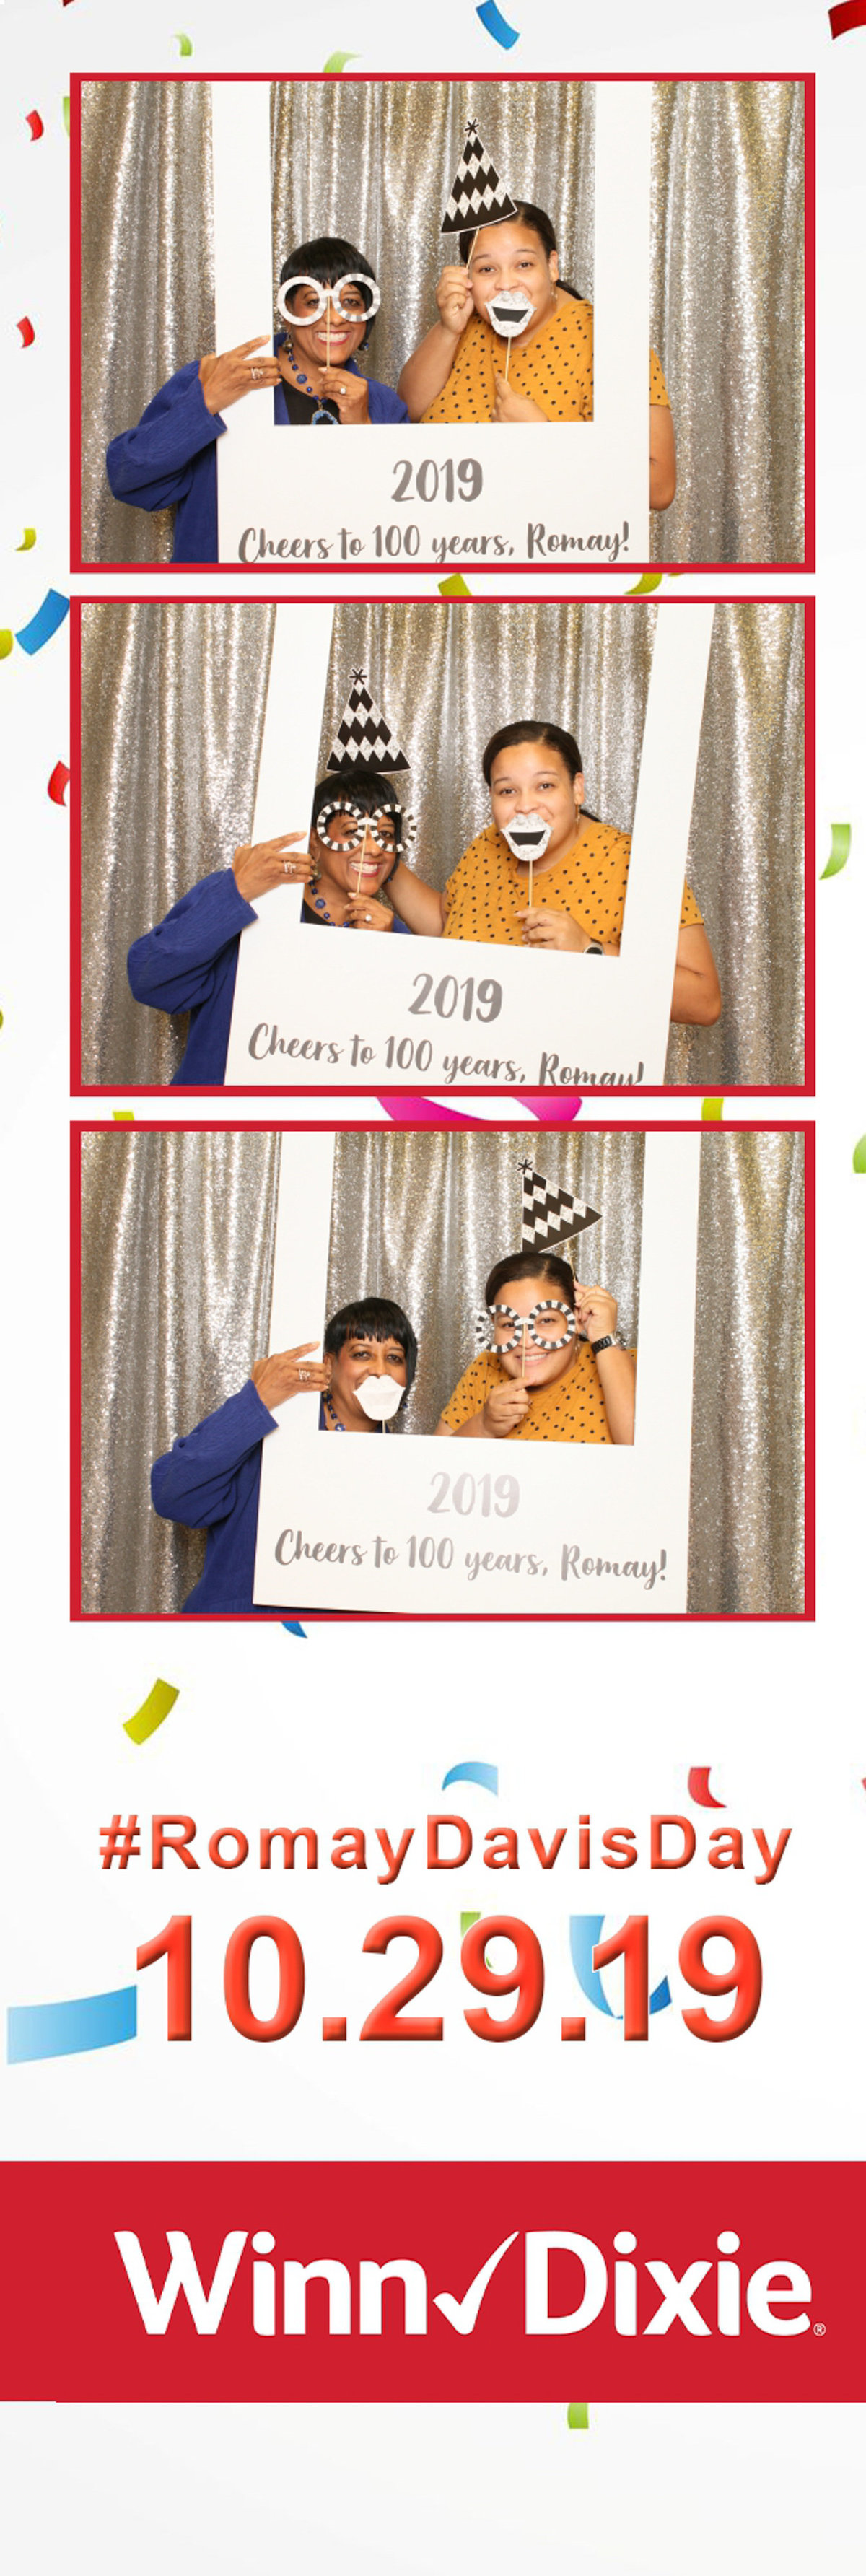 Romay Davis' 100th birthday event and photo booth rental in Montgomery, Alabama. October 29th, 2019.